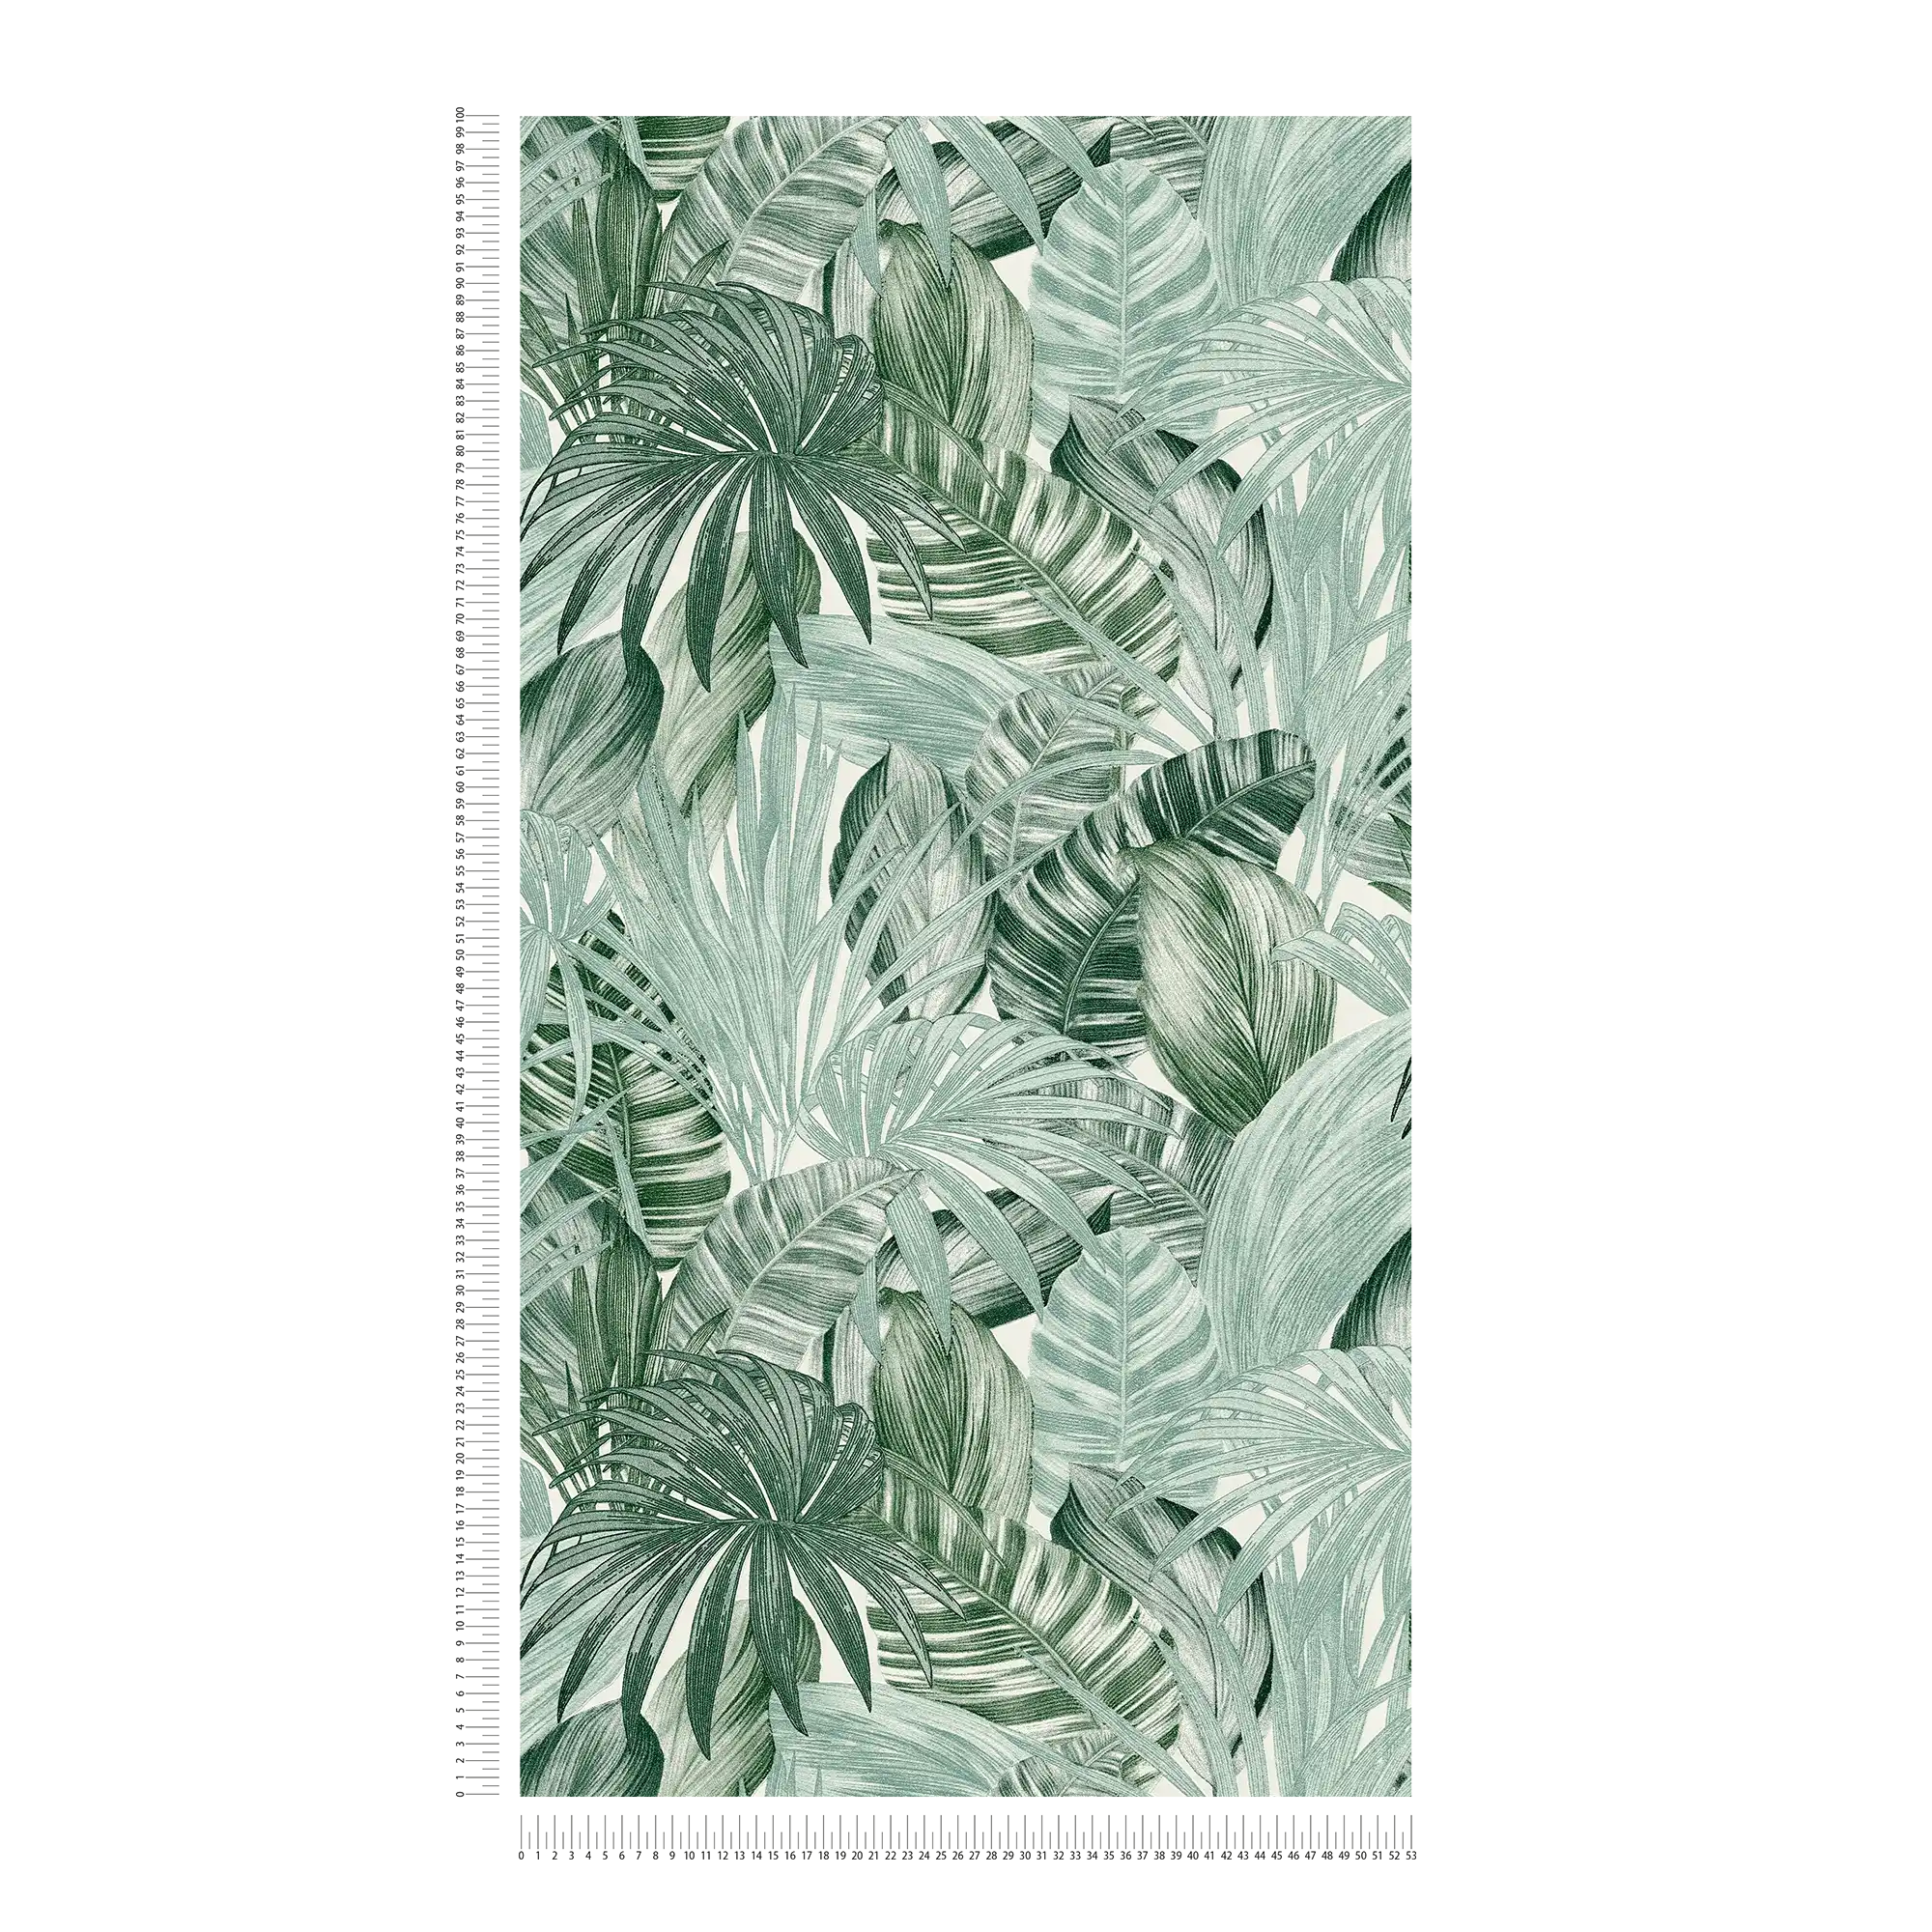             Pattern wallpaper with leaf motif in drawing style - green, white
        